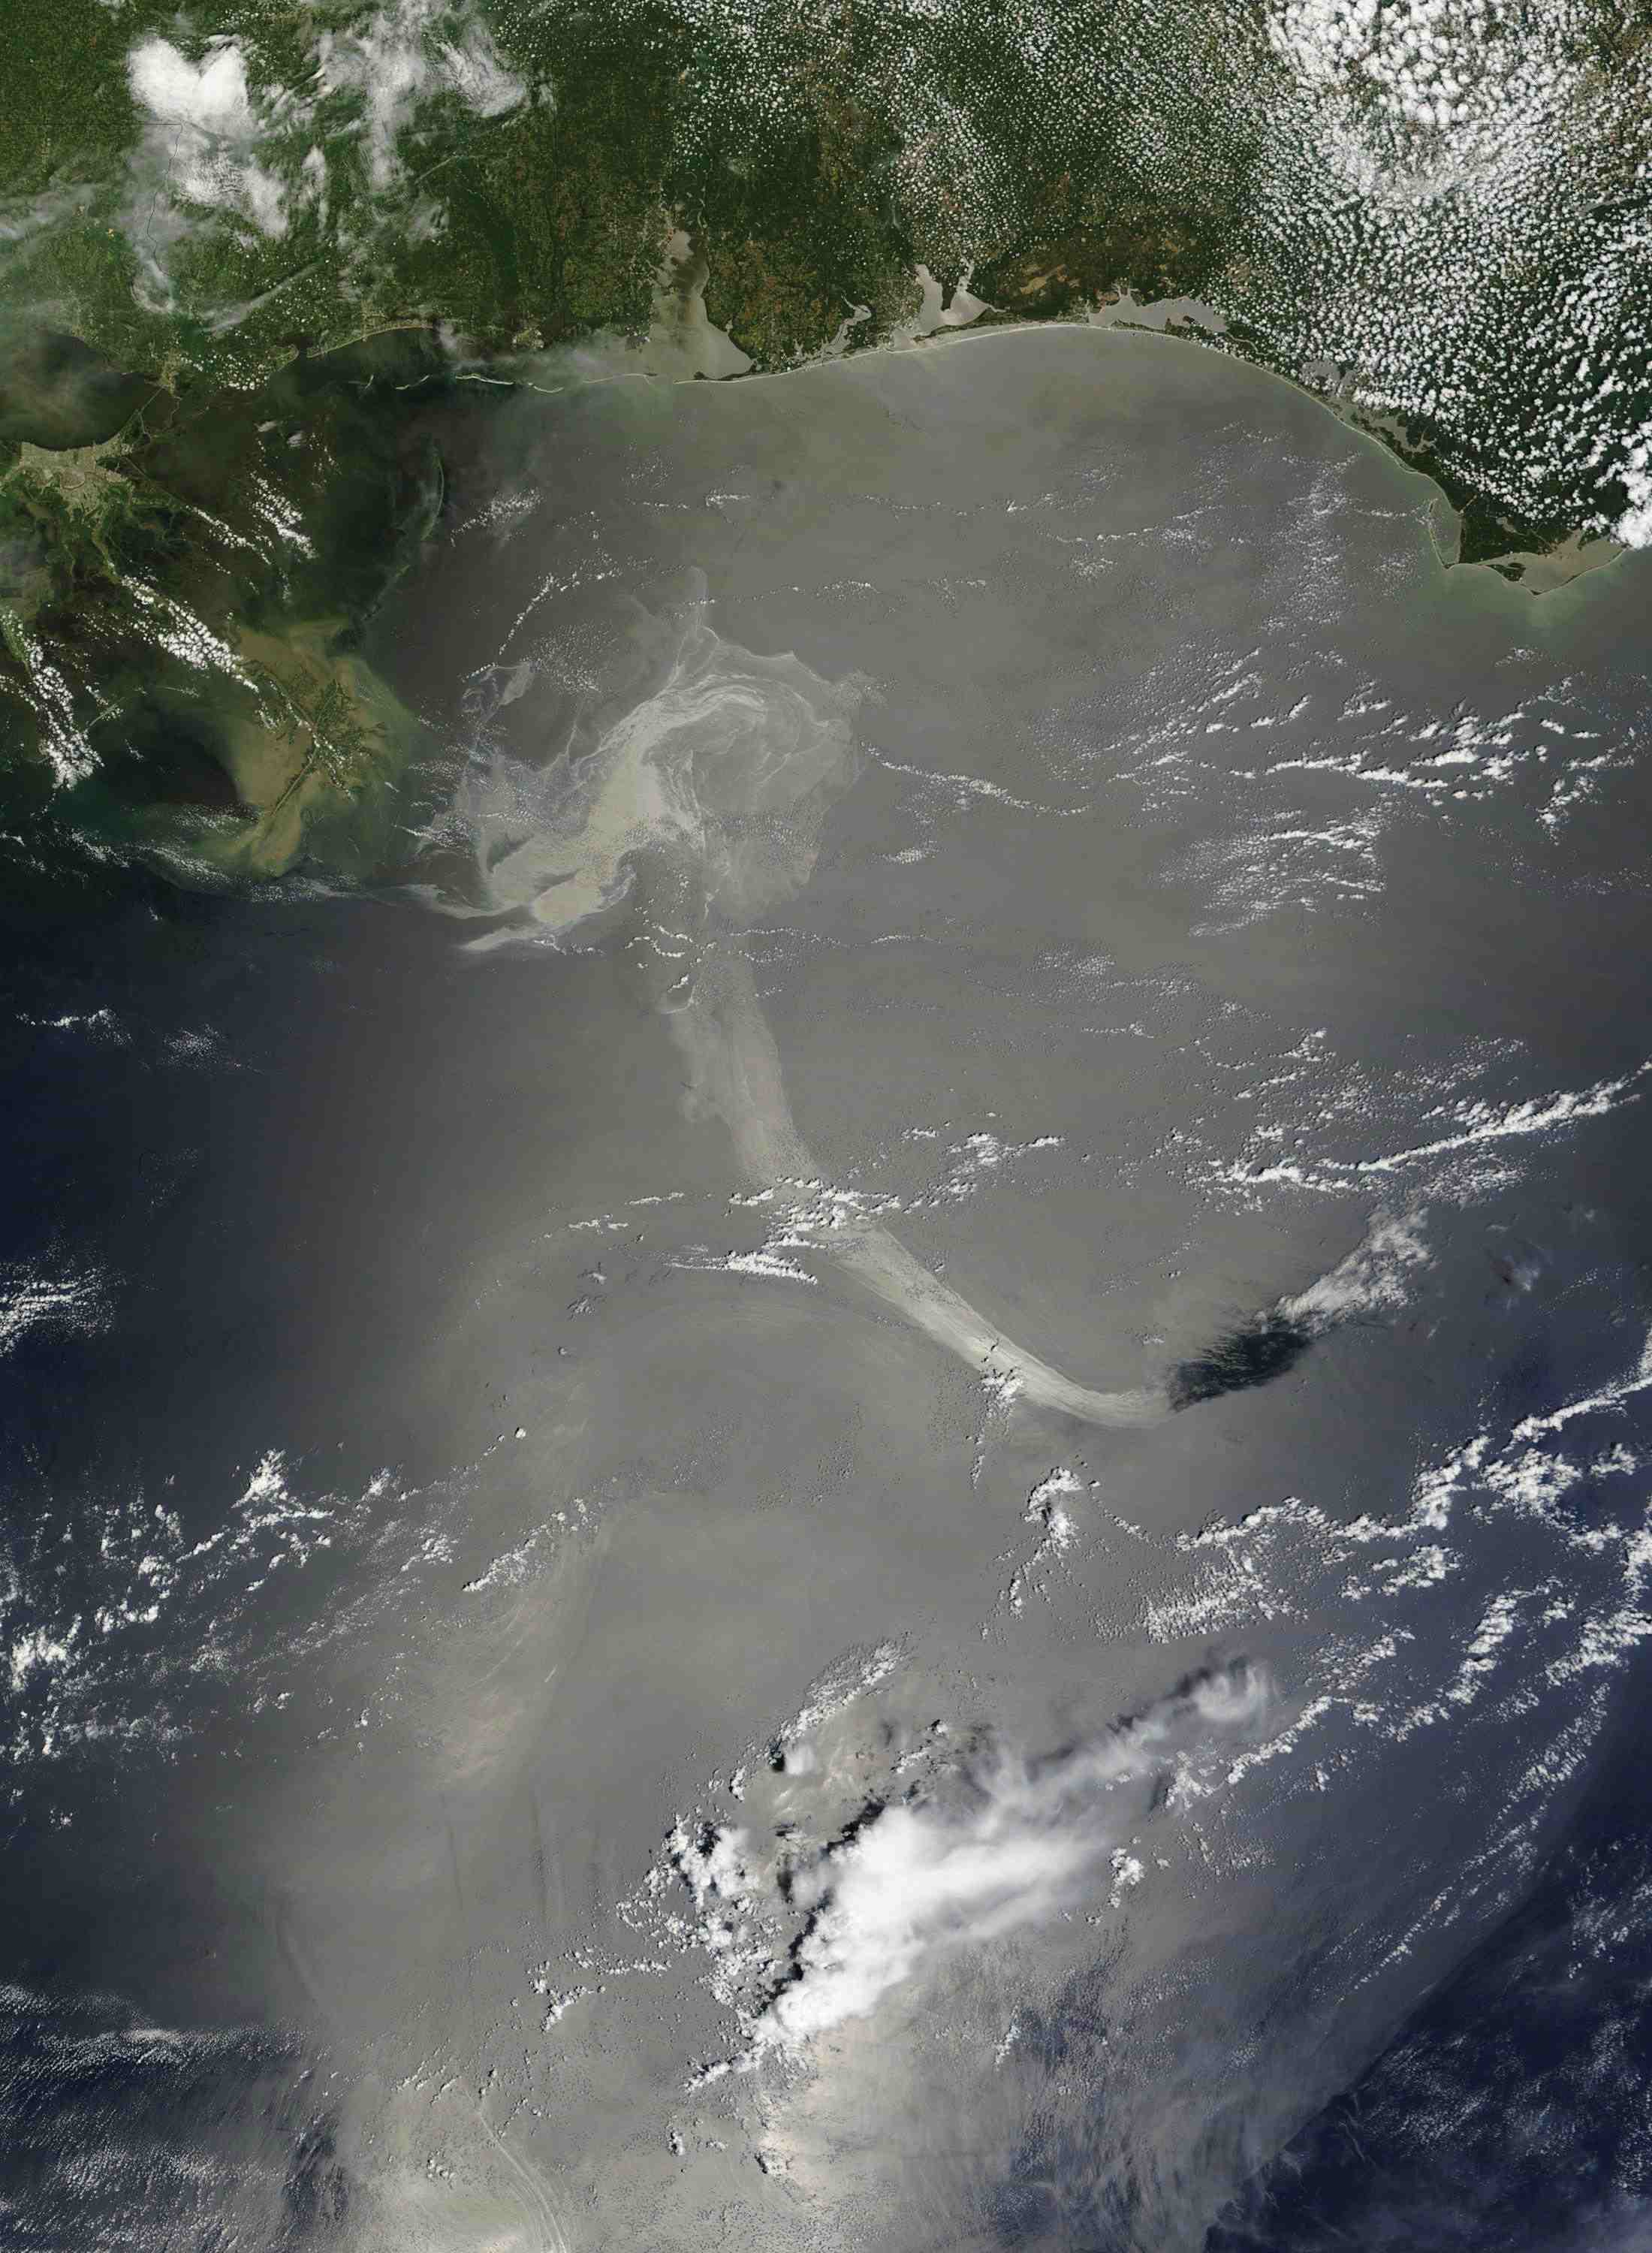 Crude oil coats the water’s surface in the Gulf of Mexico after the Deepwater Horizon oil rig sank following an explosion.